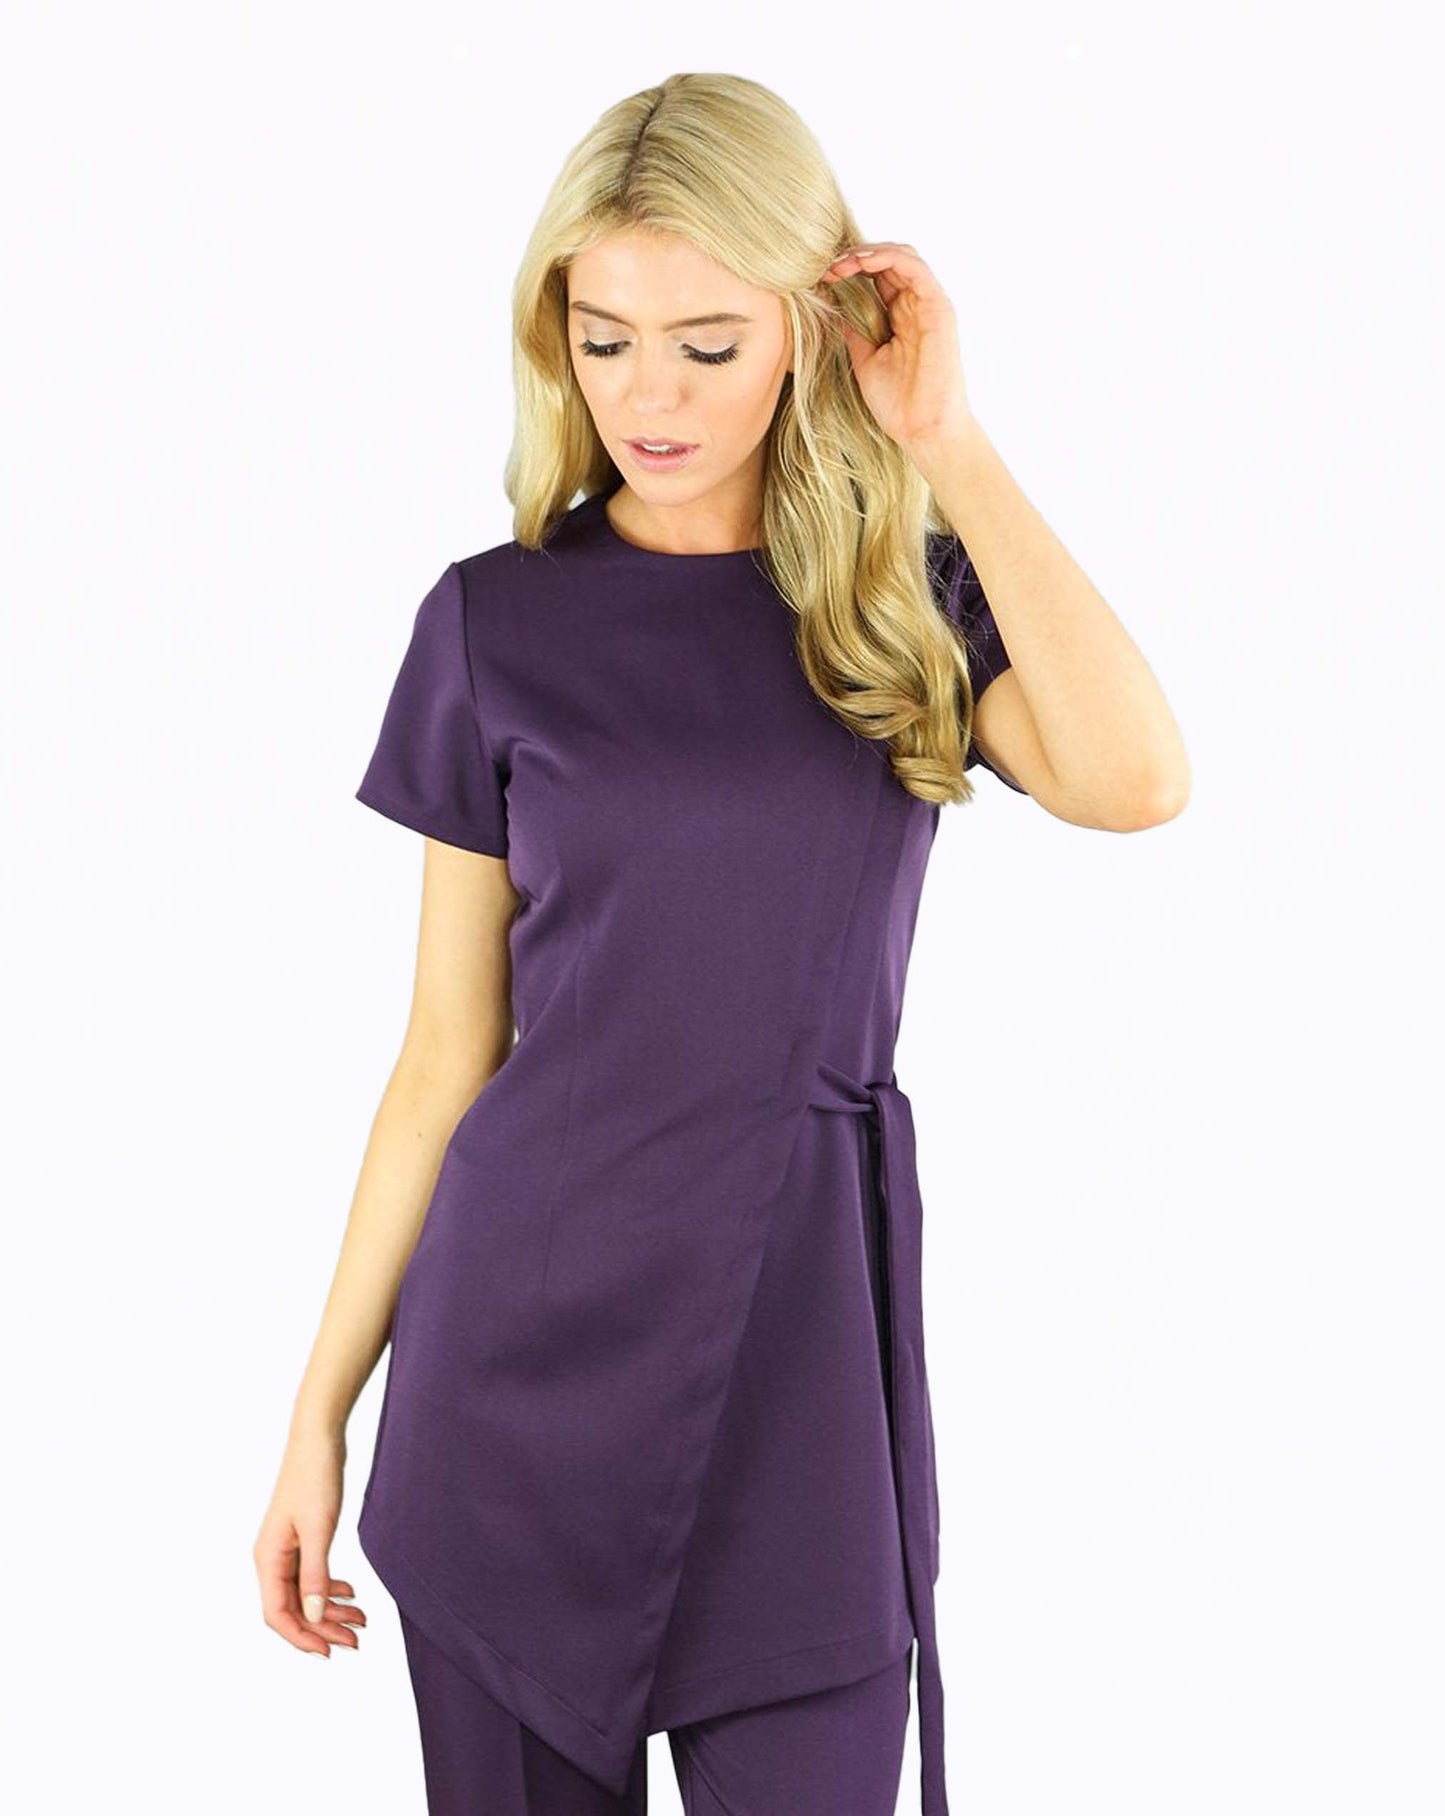 Tranquility Asymmetric Beauty Tunic (Superior 4-Way Stretch)